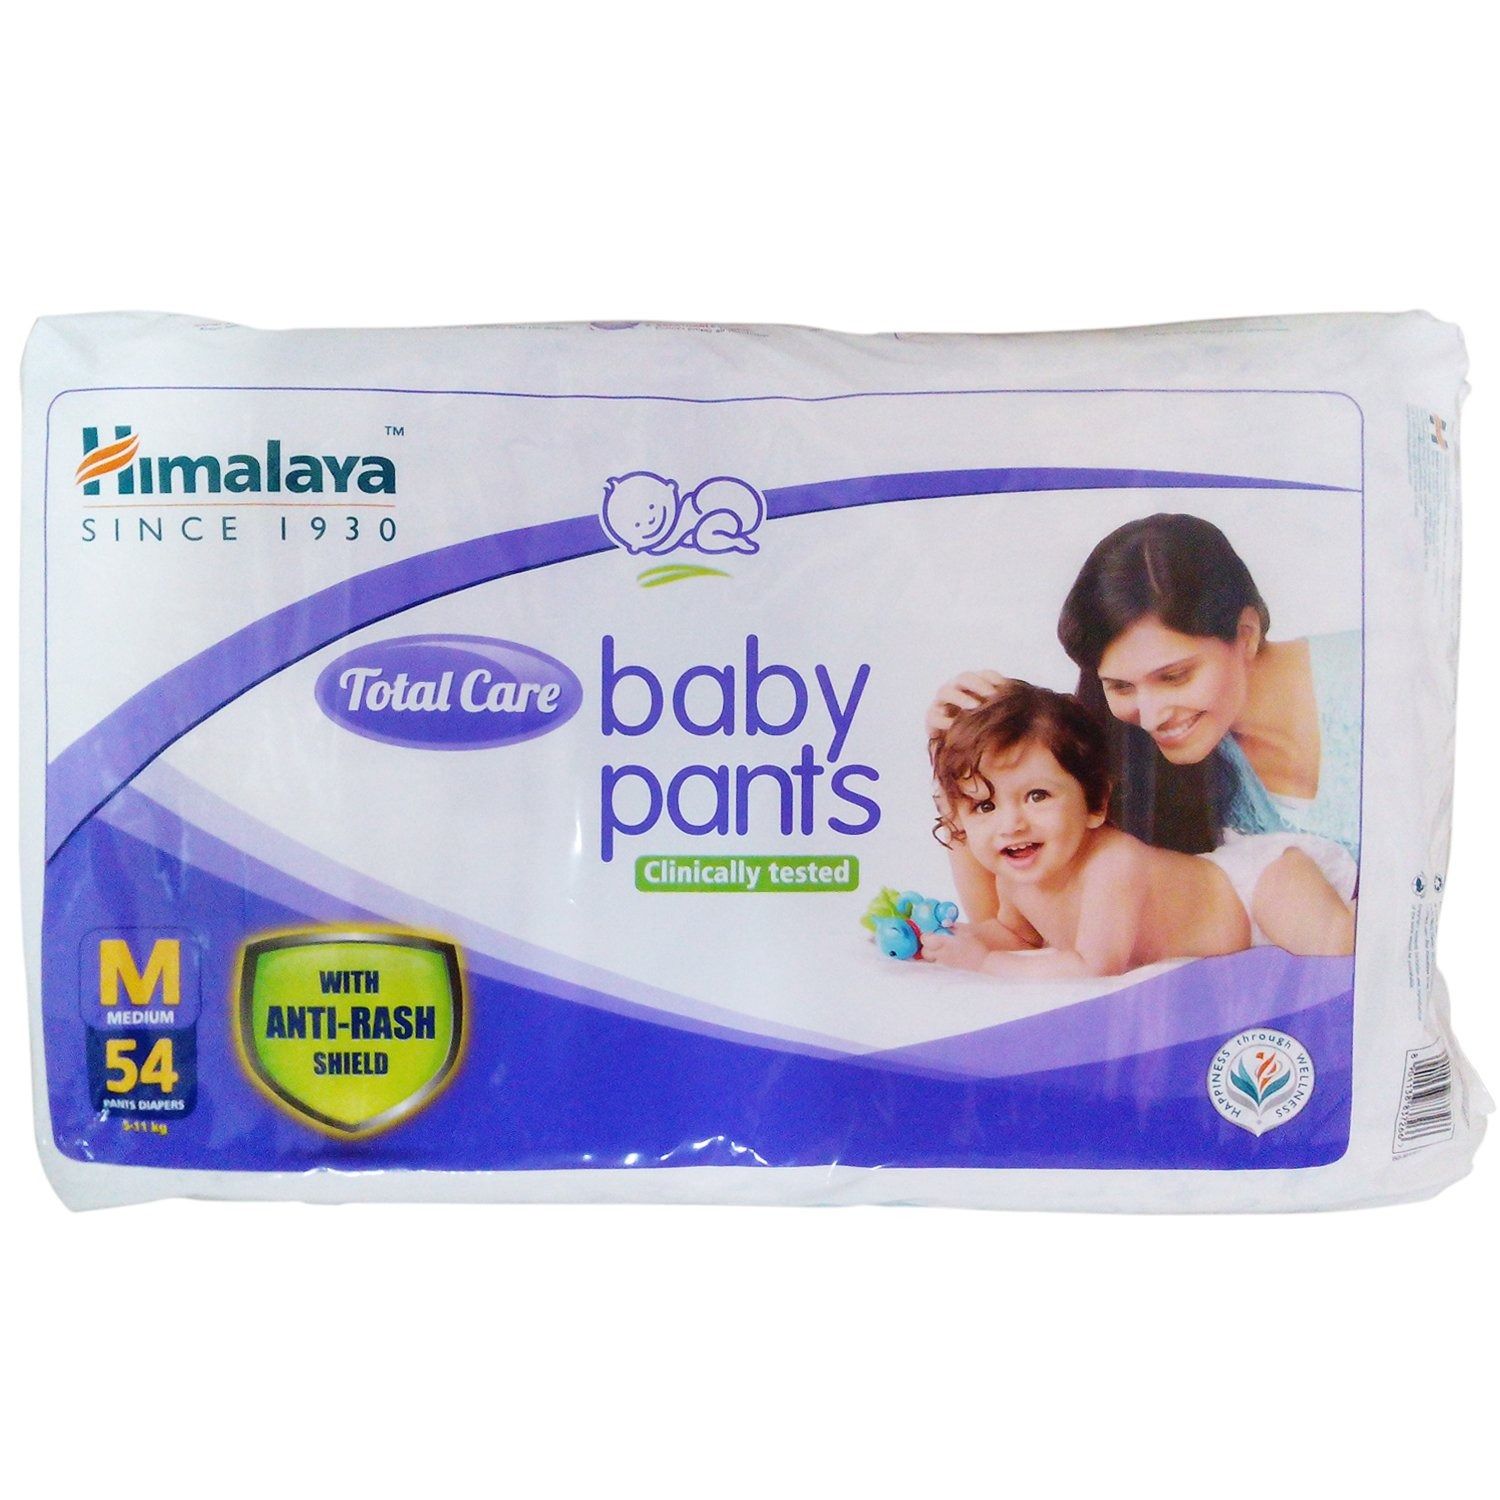 Himalaya Total Care Baby Pants Small (9): Uses, Price, Dosage, Side  Effects, Substitute, Buy Online